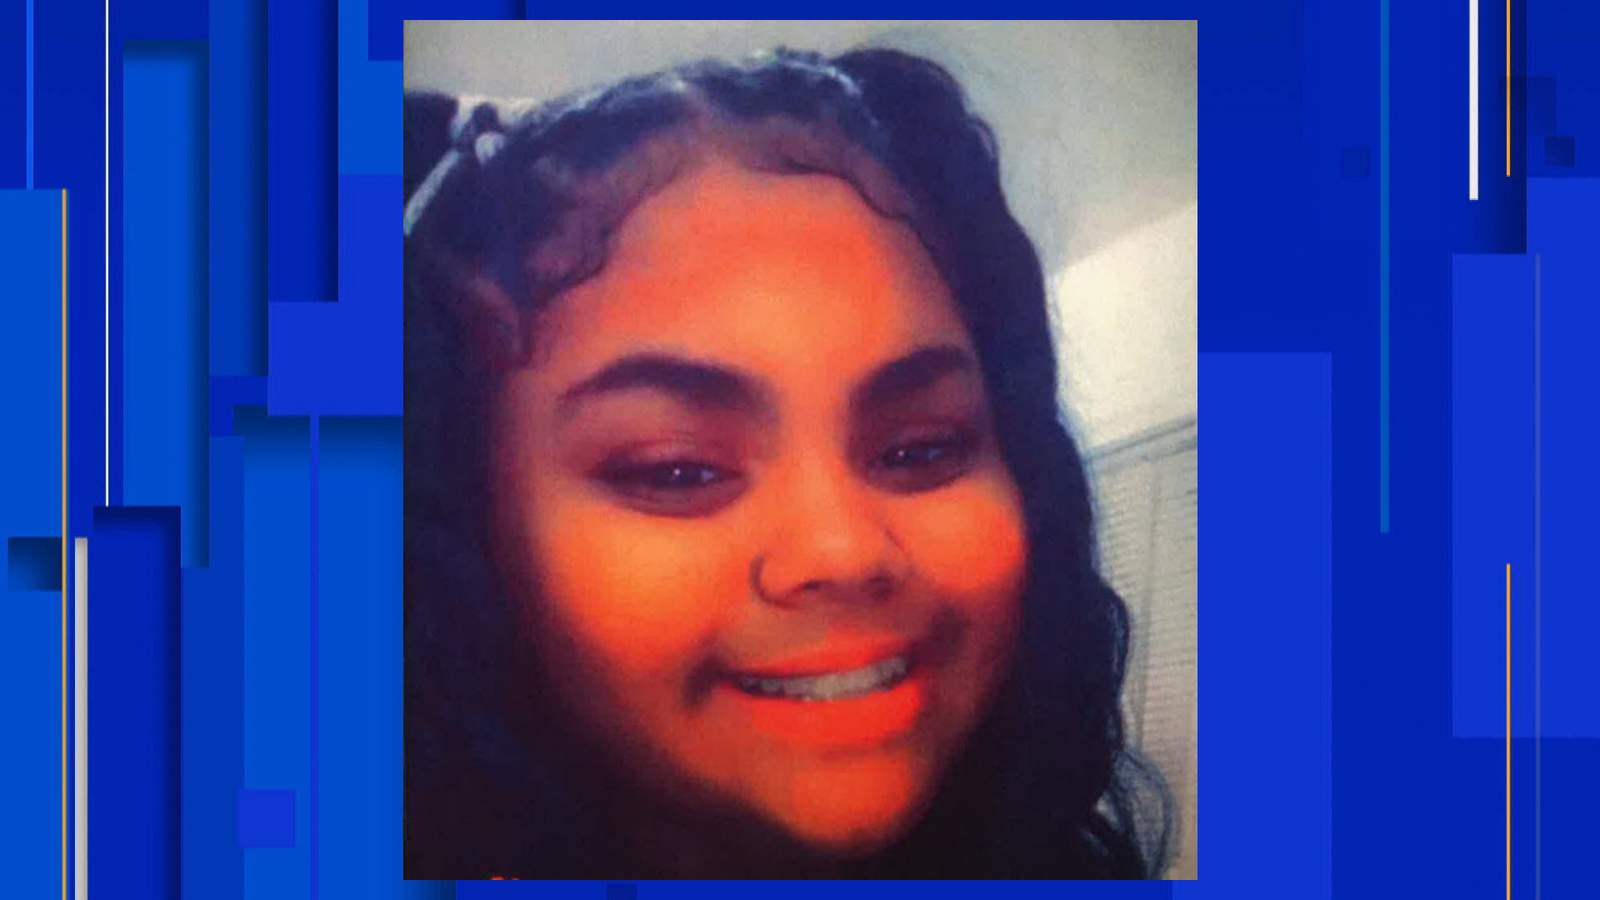 Detroit police want help finding a 13-year-old girl who has been missing since Feb. 27